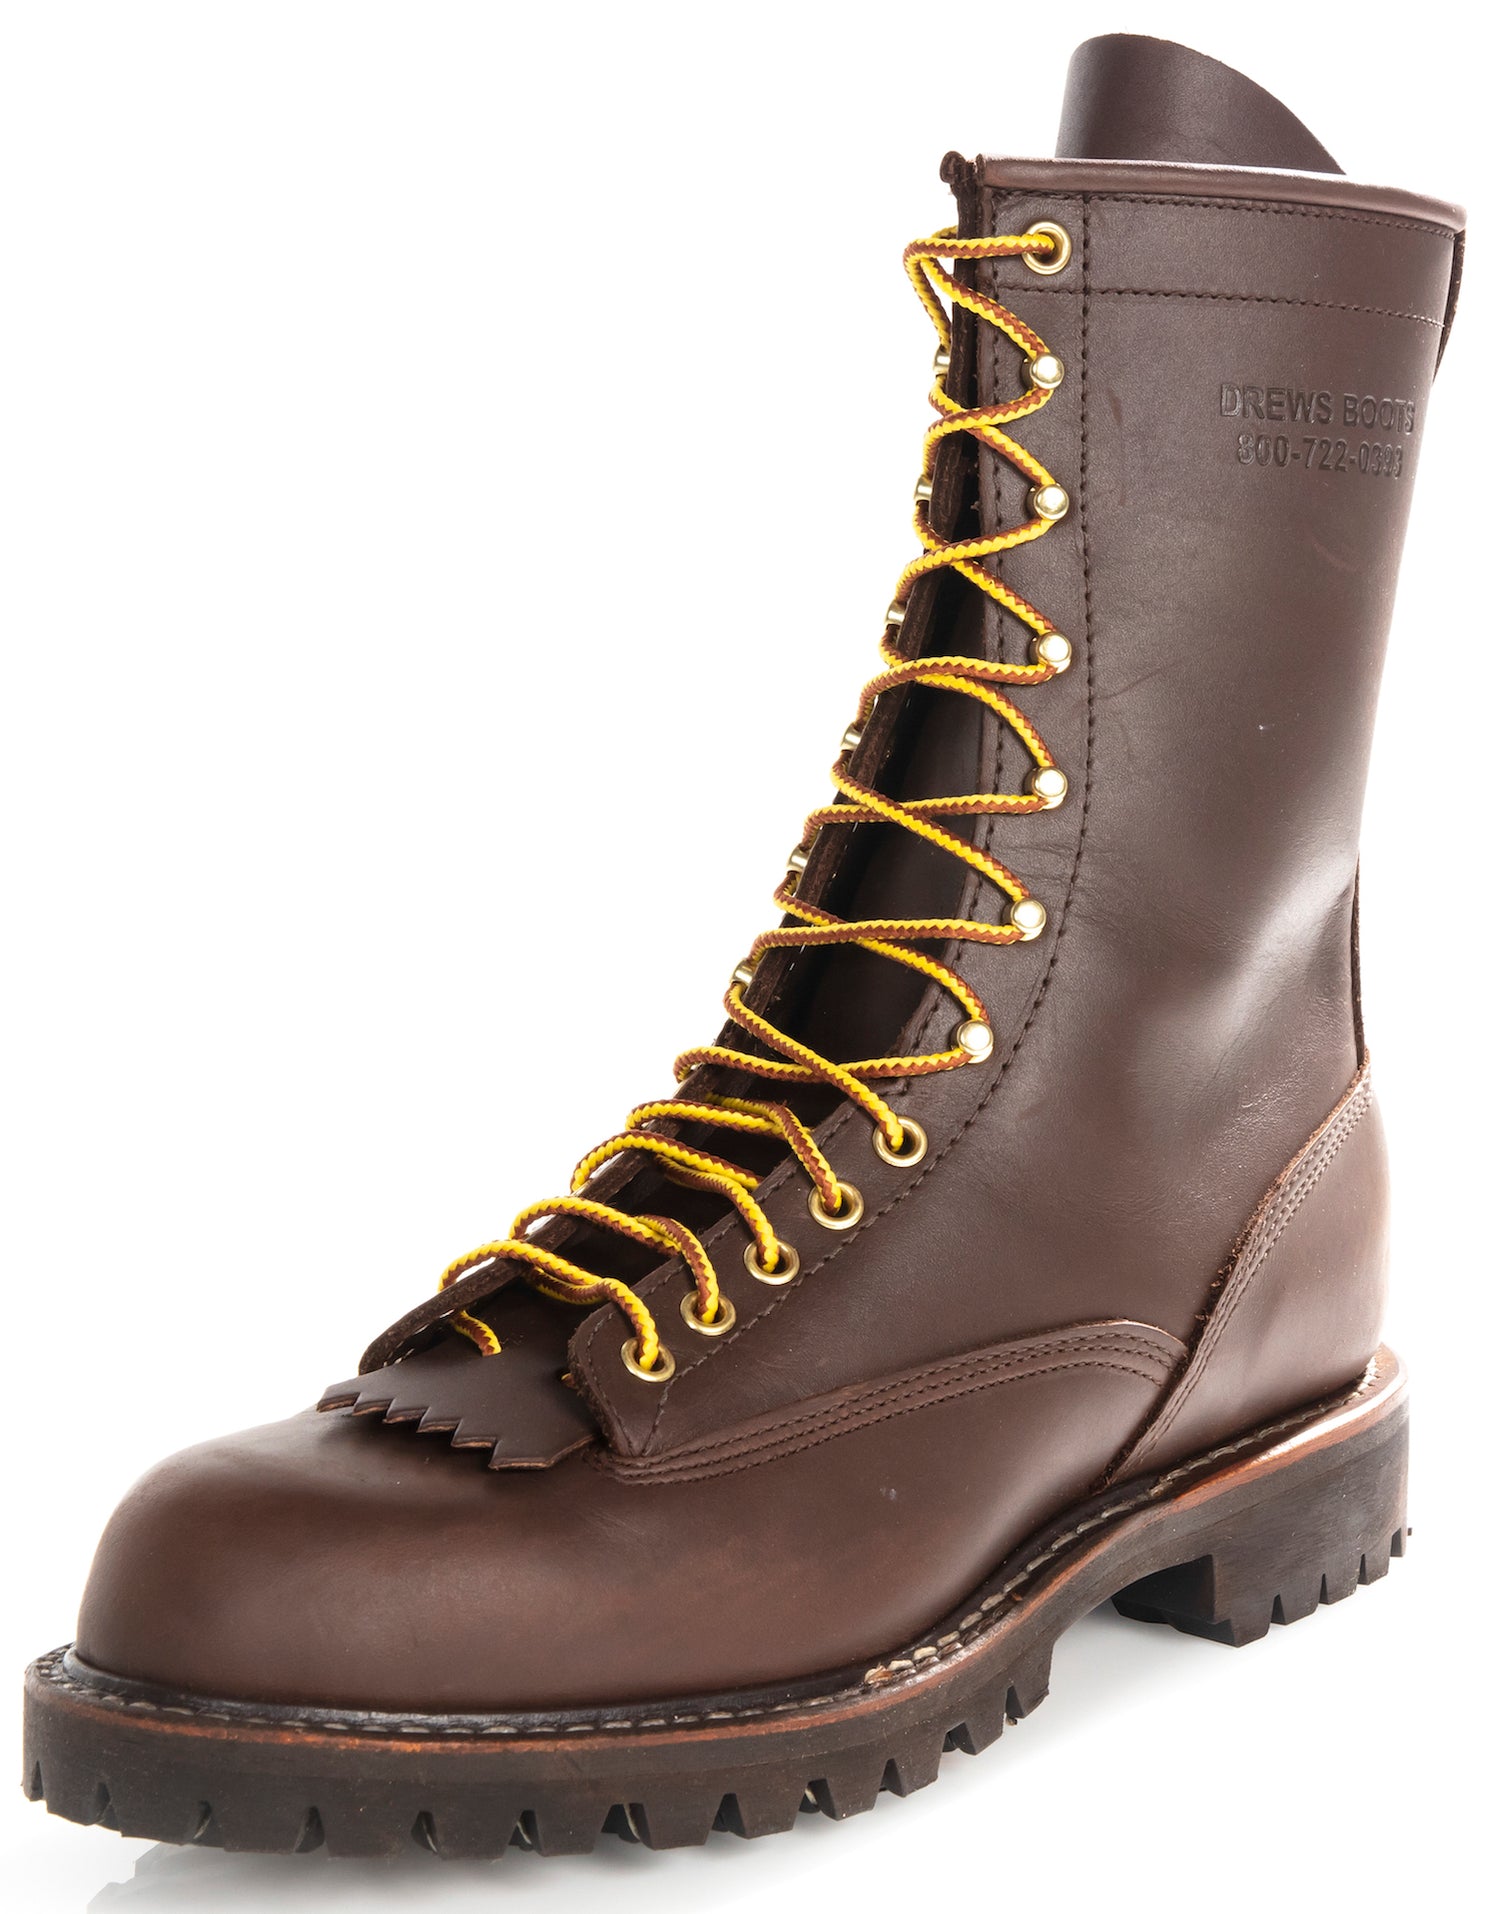 Wildland Firefighting Boots: Roughout, Roughshot & Lace-to-Toe– Drew's ...